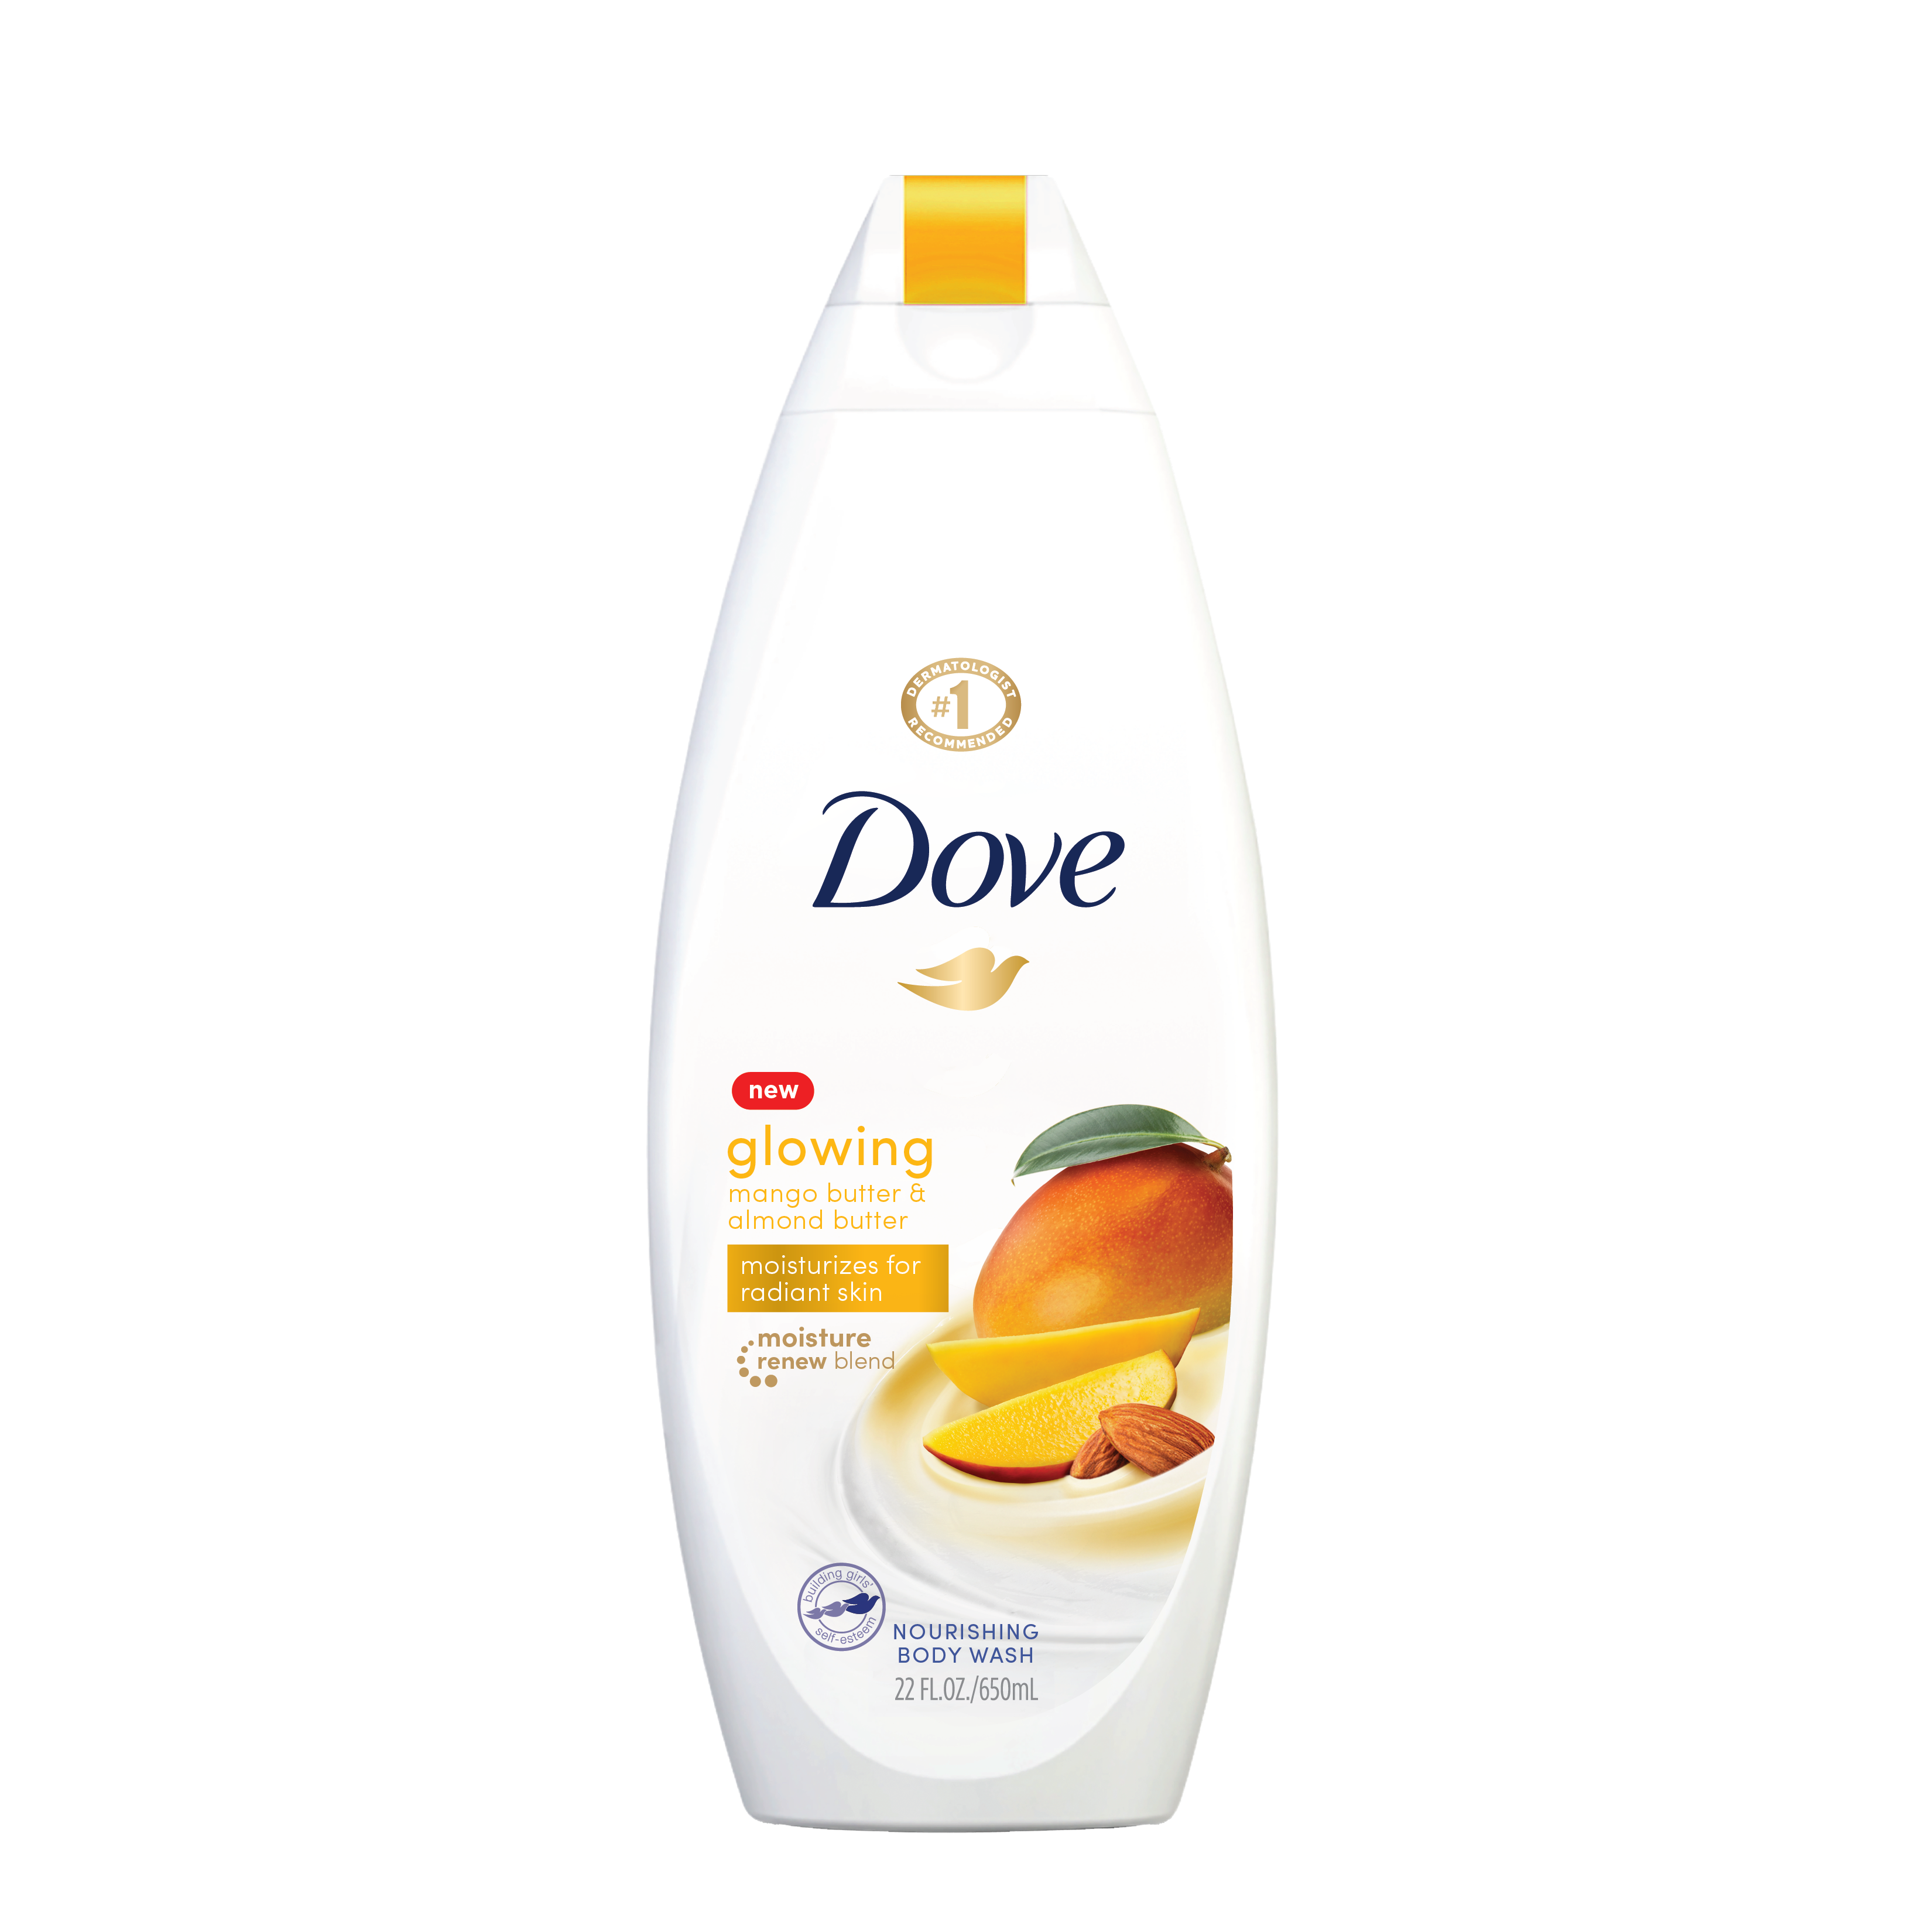 Dove’s Glowing Mango & Almond Butter Body Wash Hydrates — Review